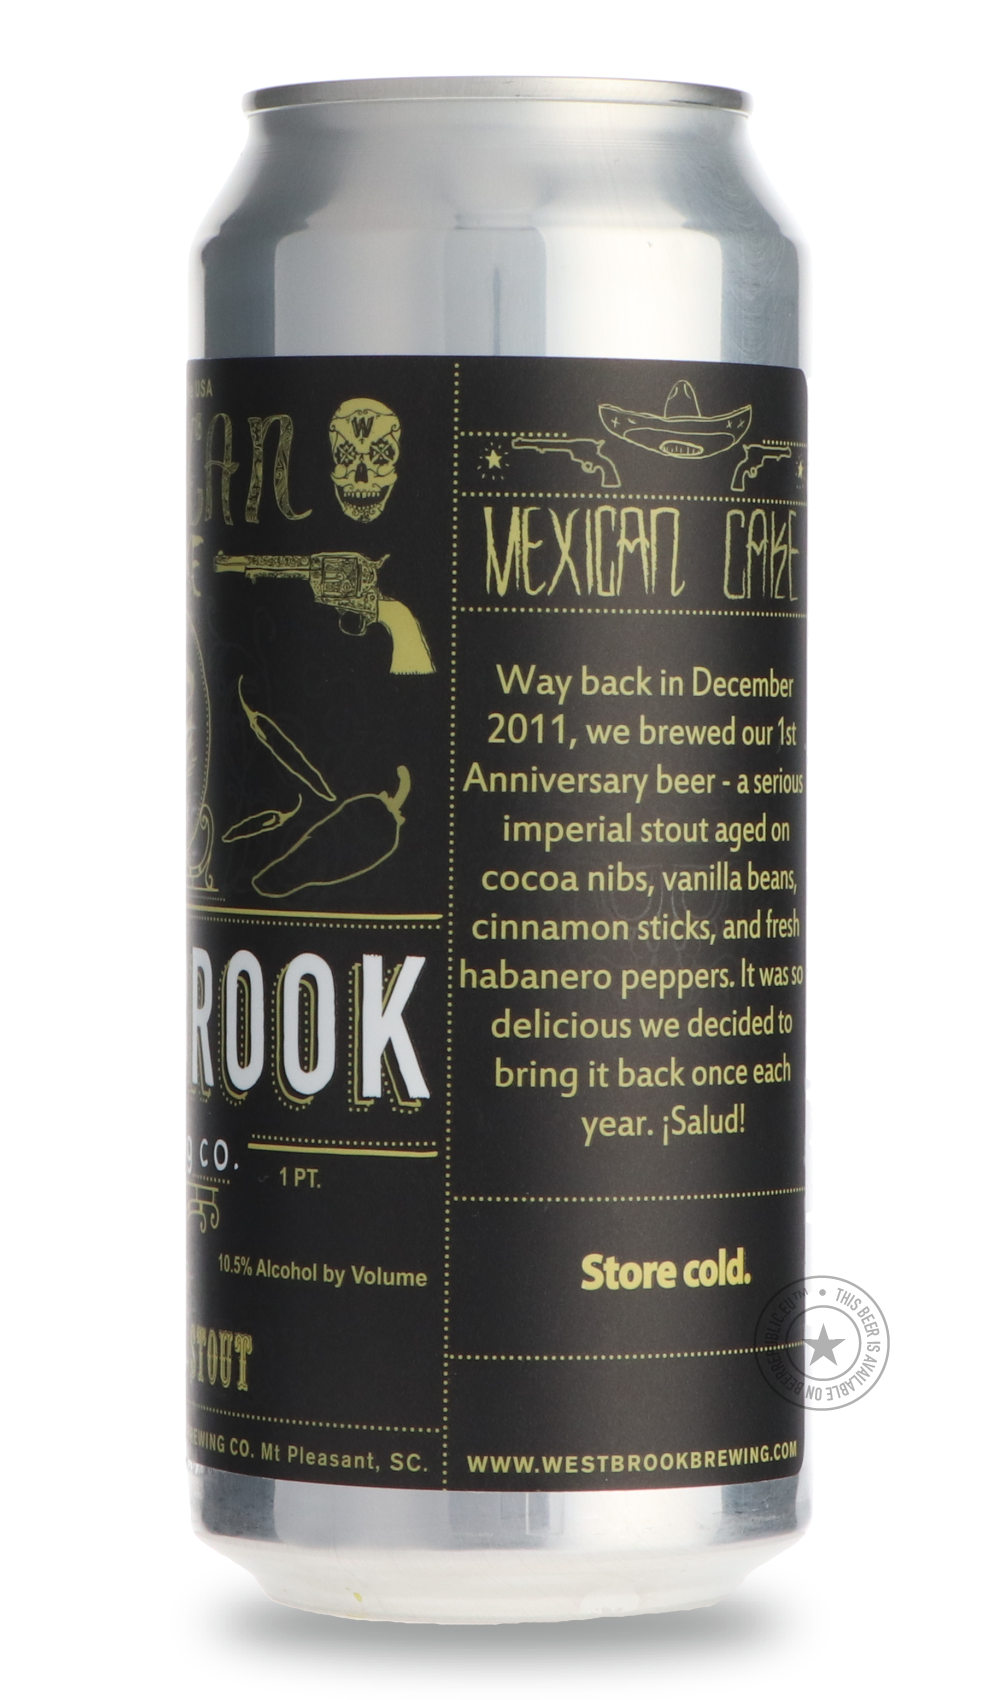 -Westbrook- Mexican Cake-Stout & Porter- Only @ Beer Republic - The best online beer store for American & Canadian craft beer - Buy beer online from the USA and Canada - Bier online kopen - Amerikaans bier kopen - Craft beer store - Craft beer kopen - Amerikanisch bier kaufen - Bier online kaufen - Acheter biere online - IPA - Stout - Porter - New England IPA - Hazy IPA - Imperial Stout - Barrel Aged - Barrel Aged Imperial Stout - Brown - Dark beer - Blond - Blonde - Pilsner - Lager - Wheat - Weizen - Amber